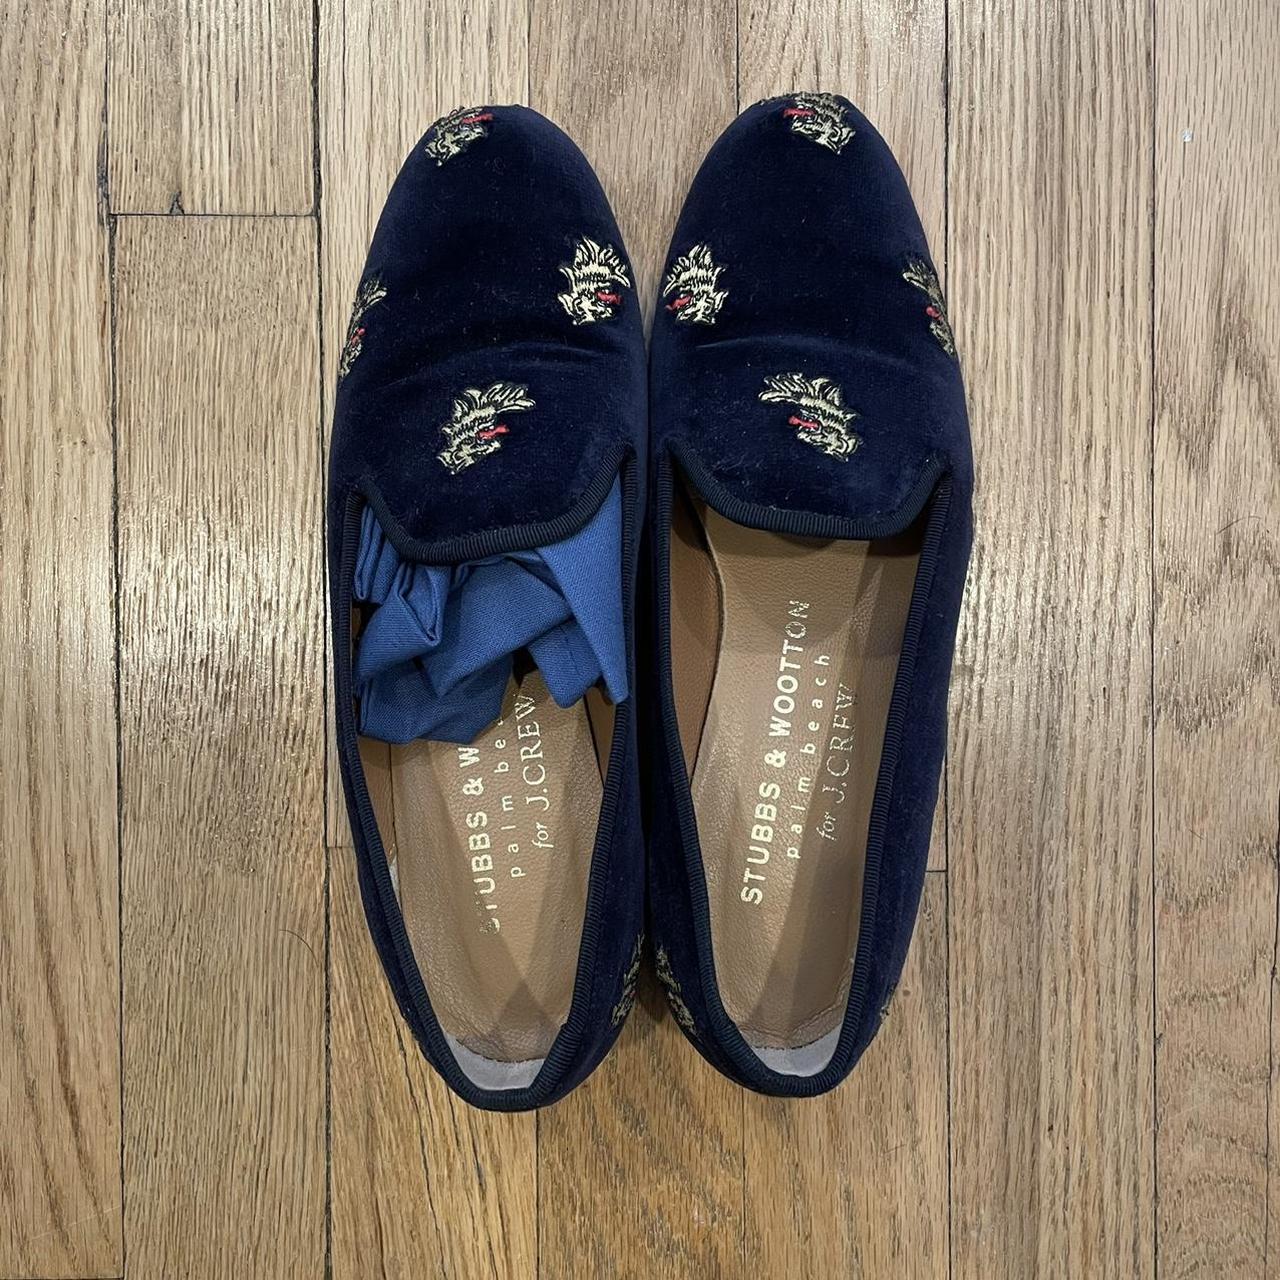 Del Toro Women's Blue and Gold Loafers